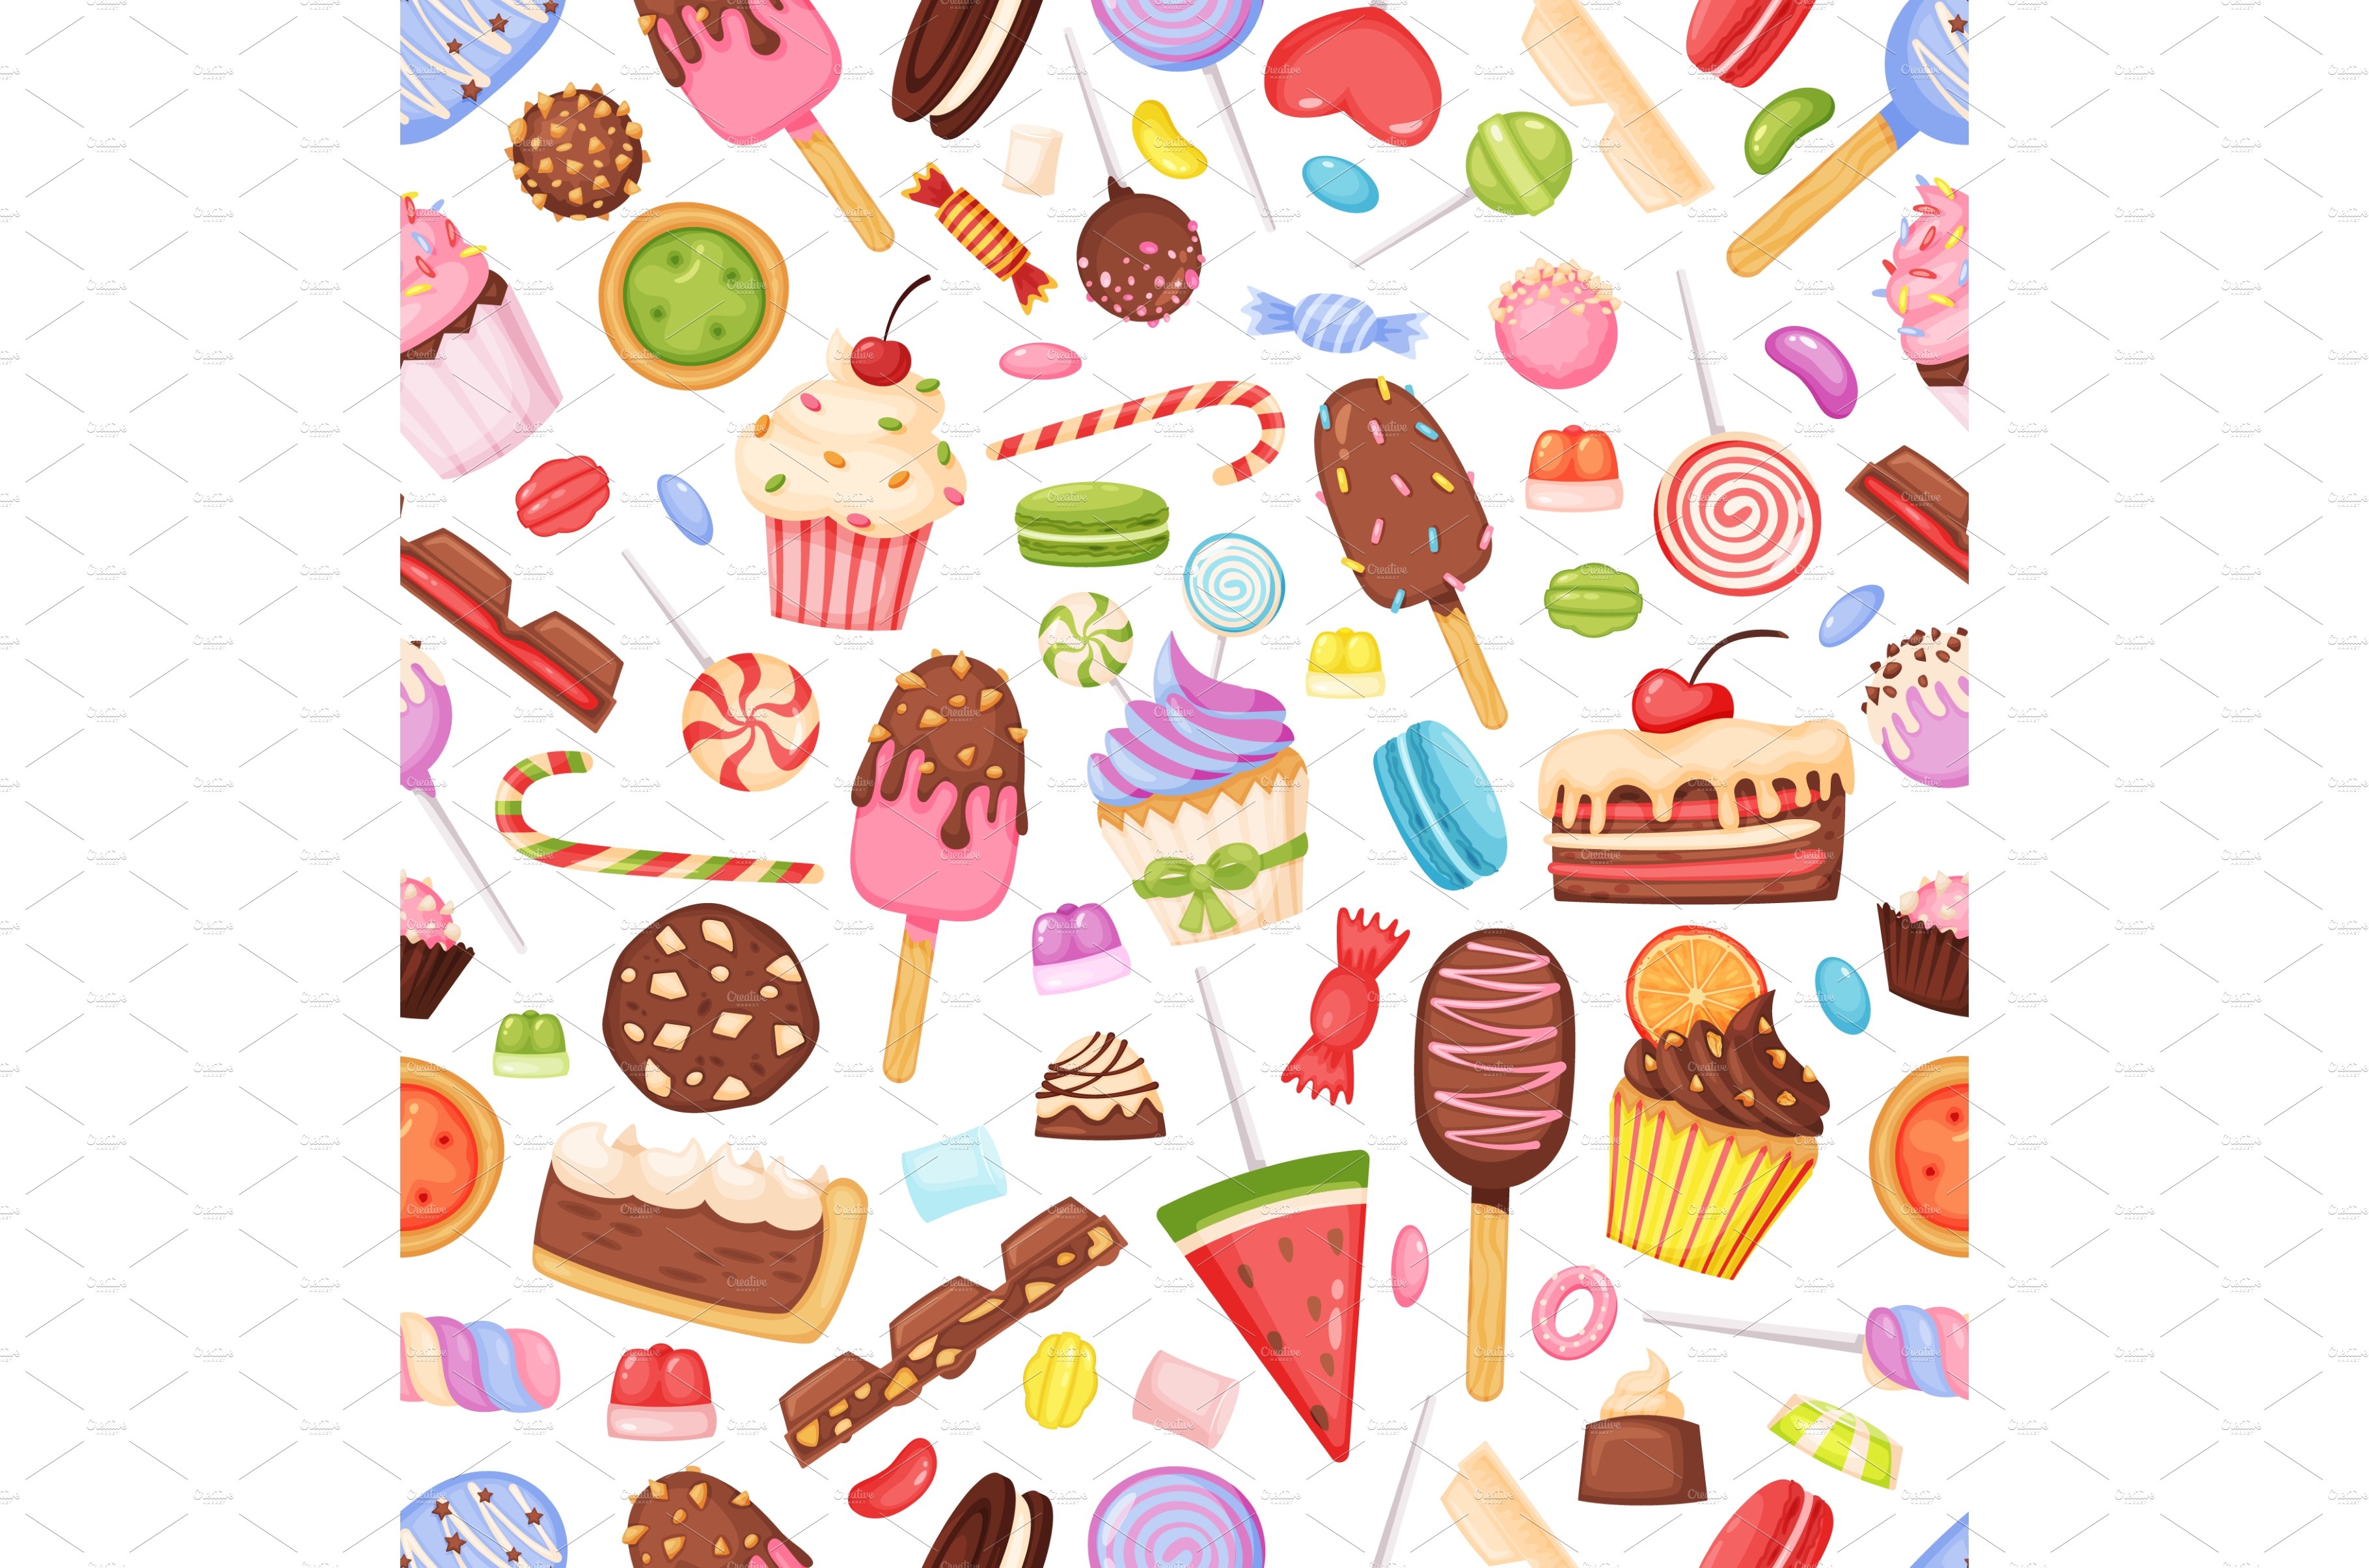 Cartoon sweets and candies cover image.